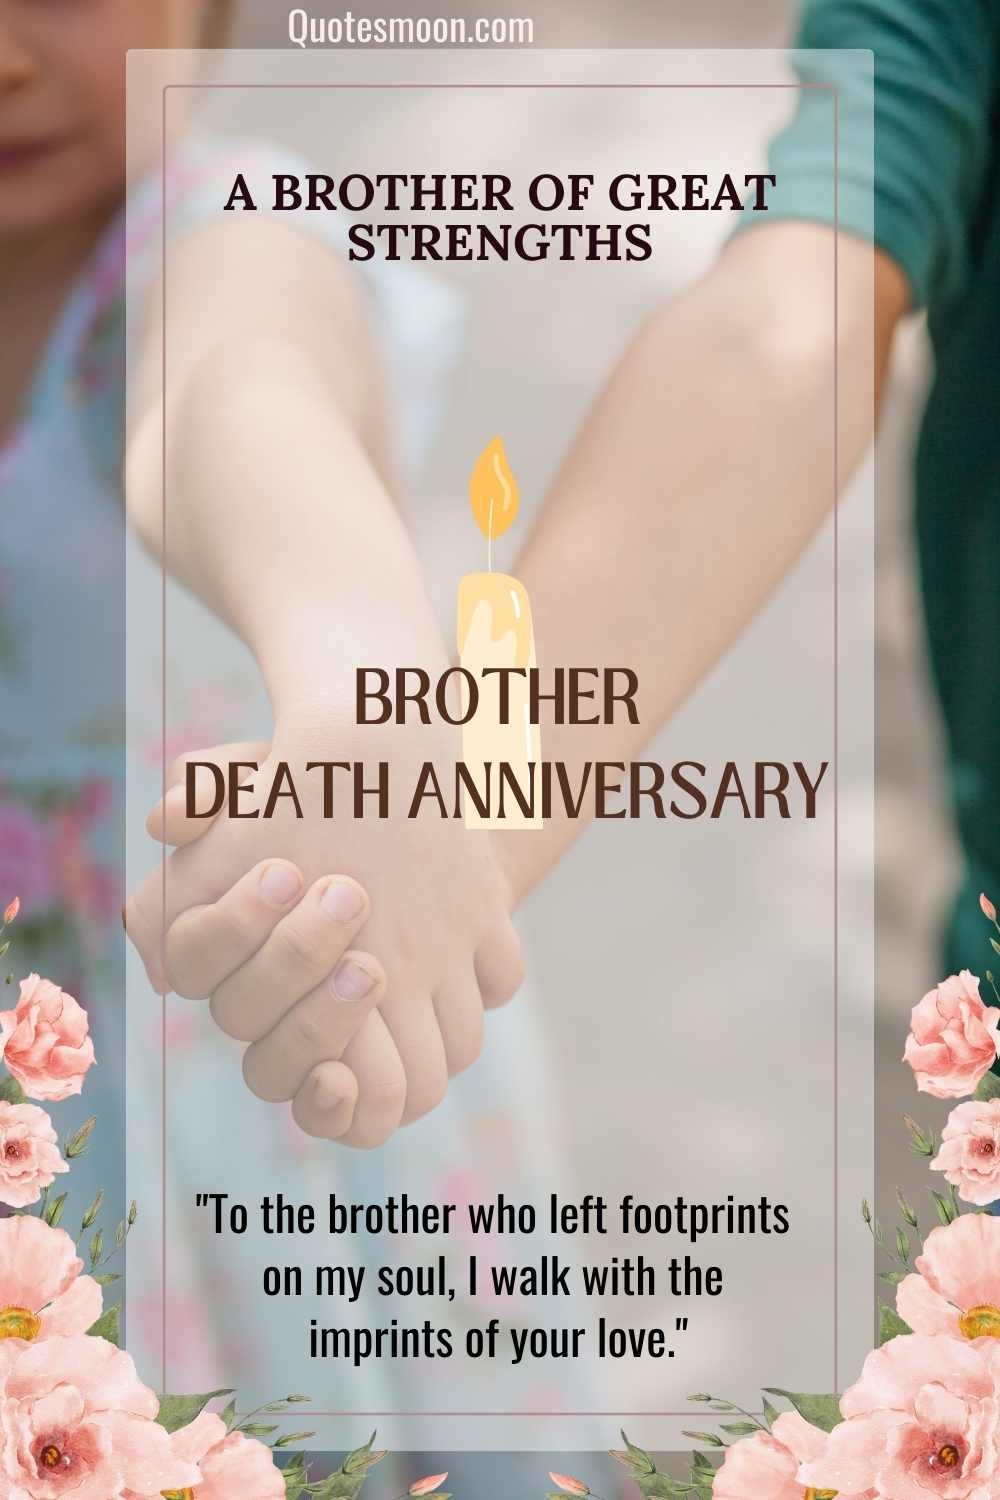 brother Death Anniversary Quotes with Images